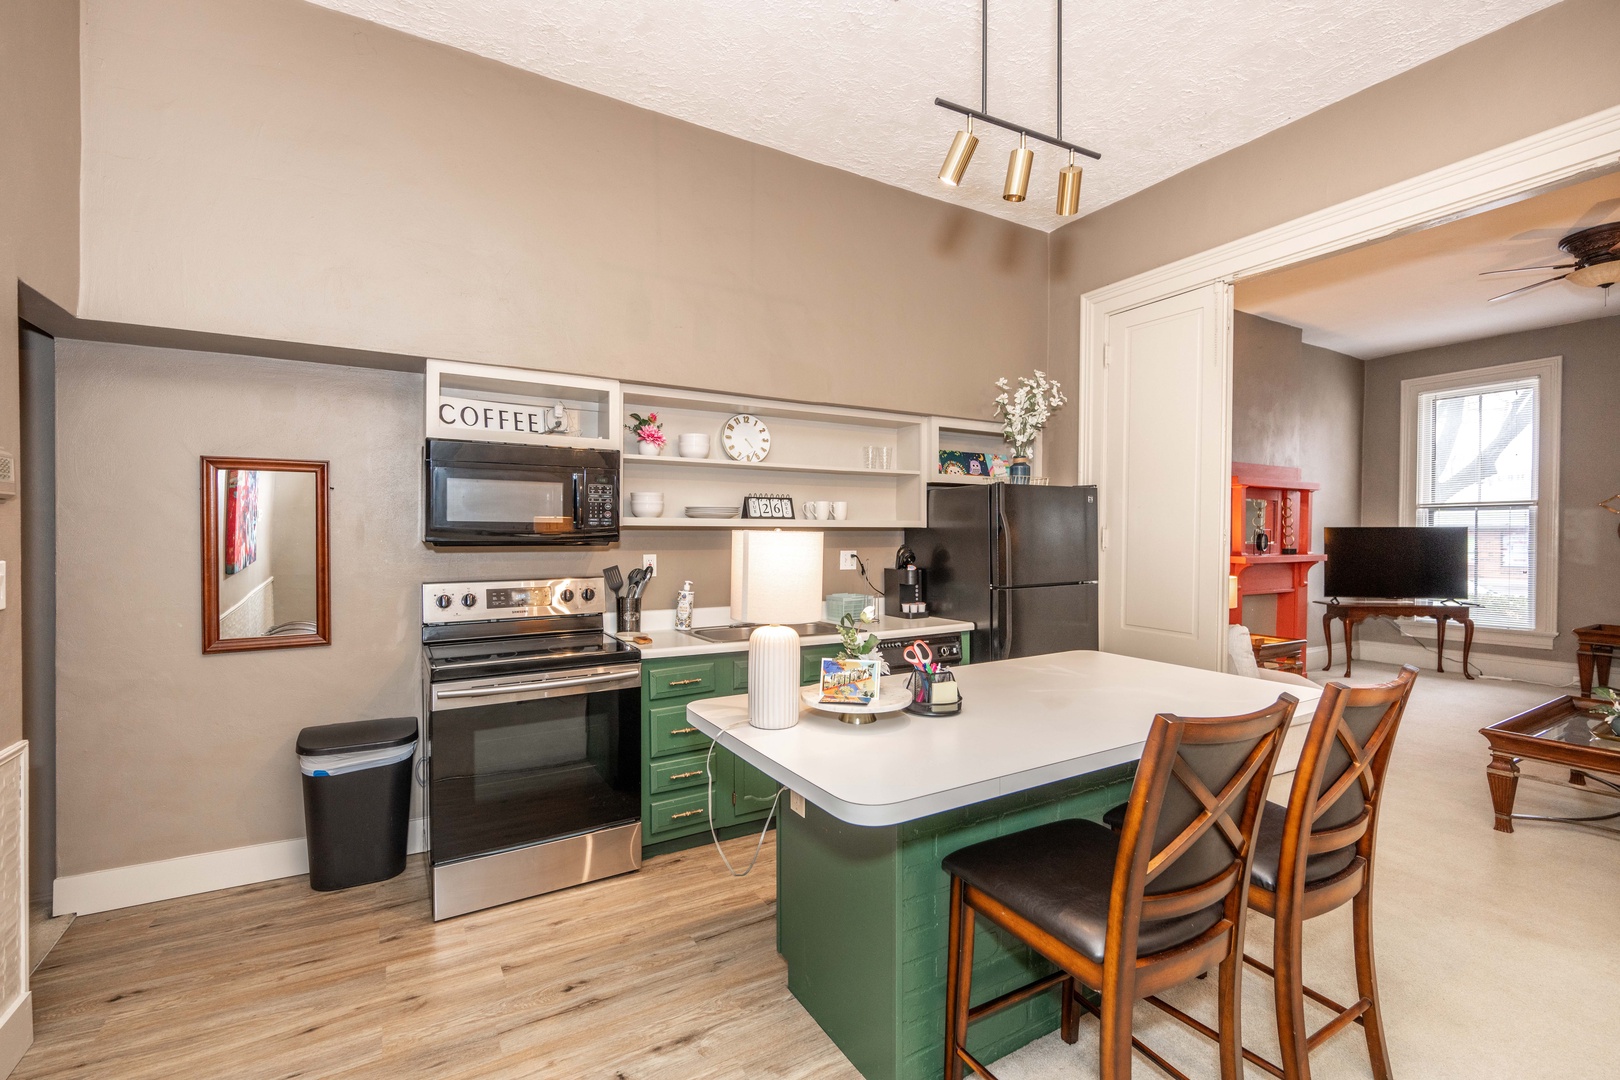 Sip morning coffee or grab a bite at the kitchen counter, with seating for 2